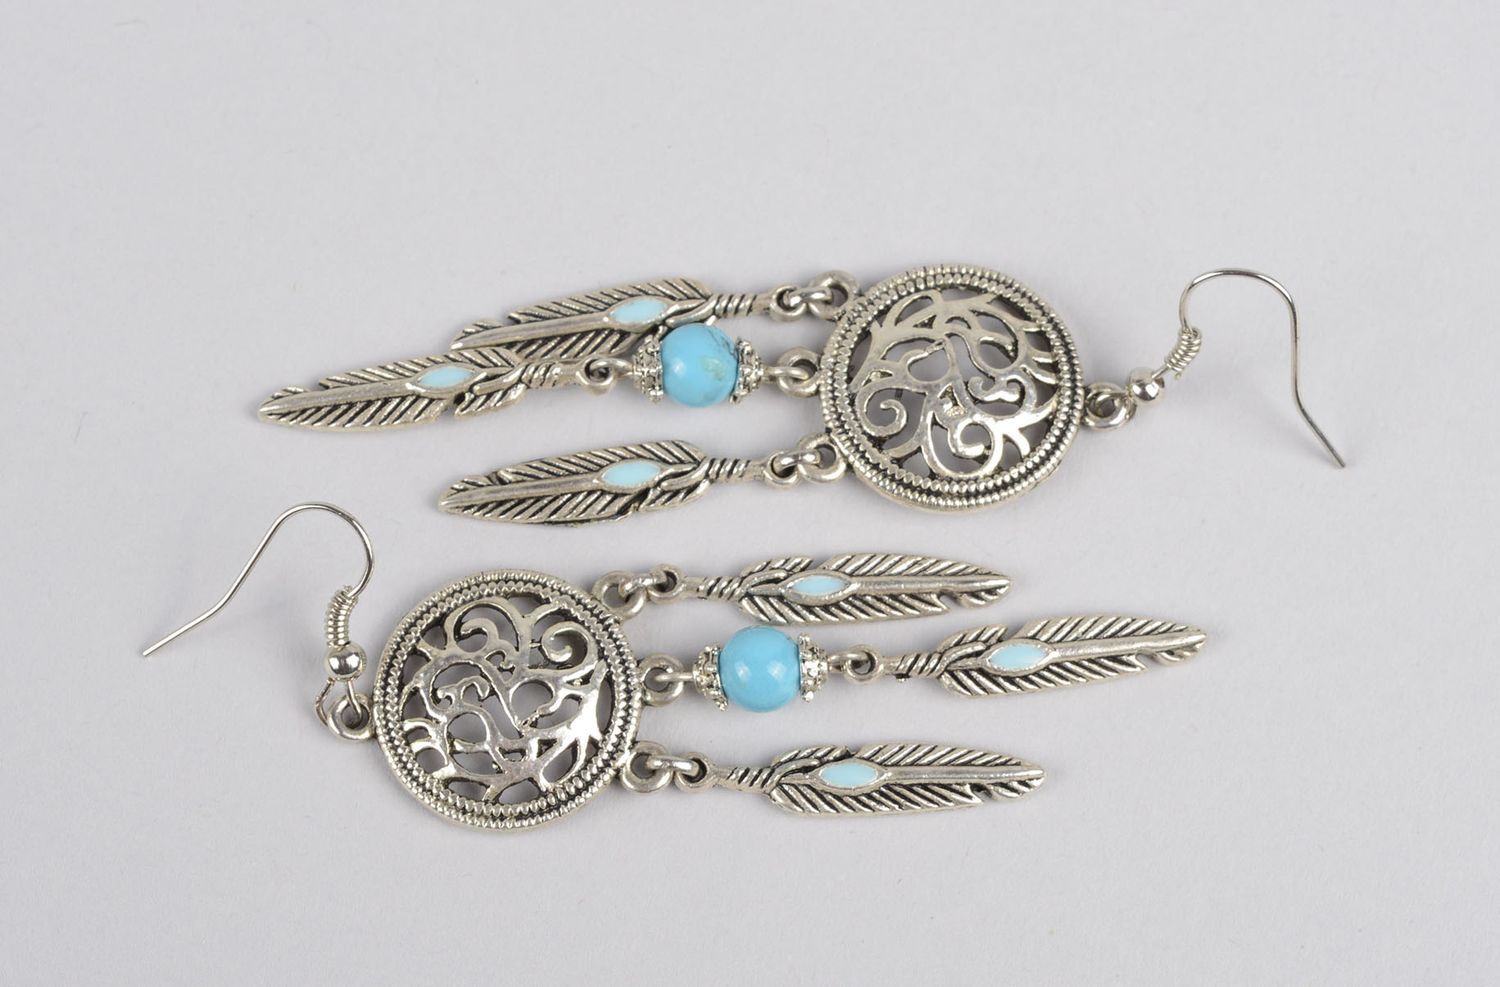 Metal earrings handmade long earrings with charms metal jewelry gift for her photo 5